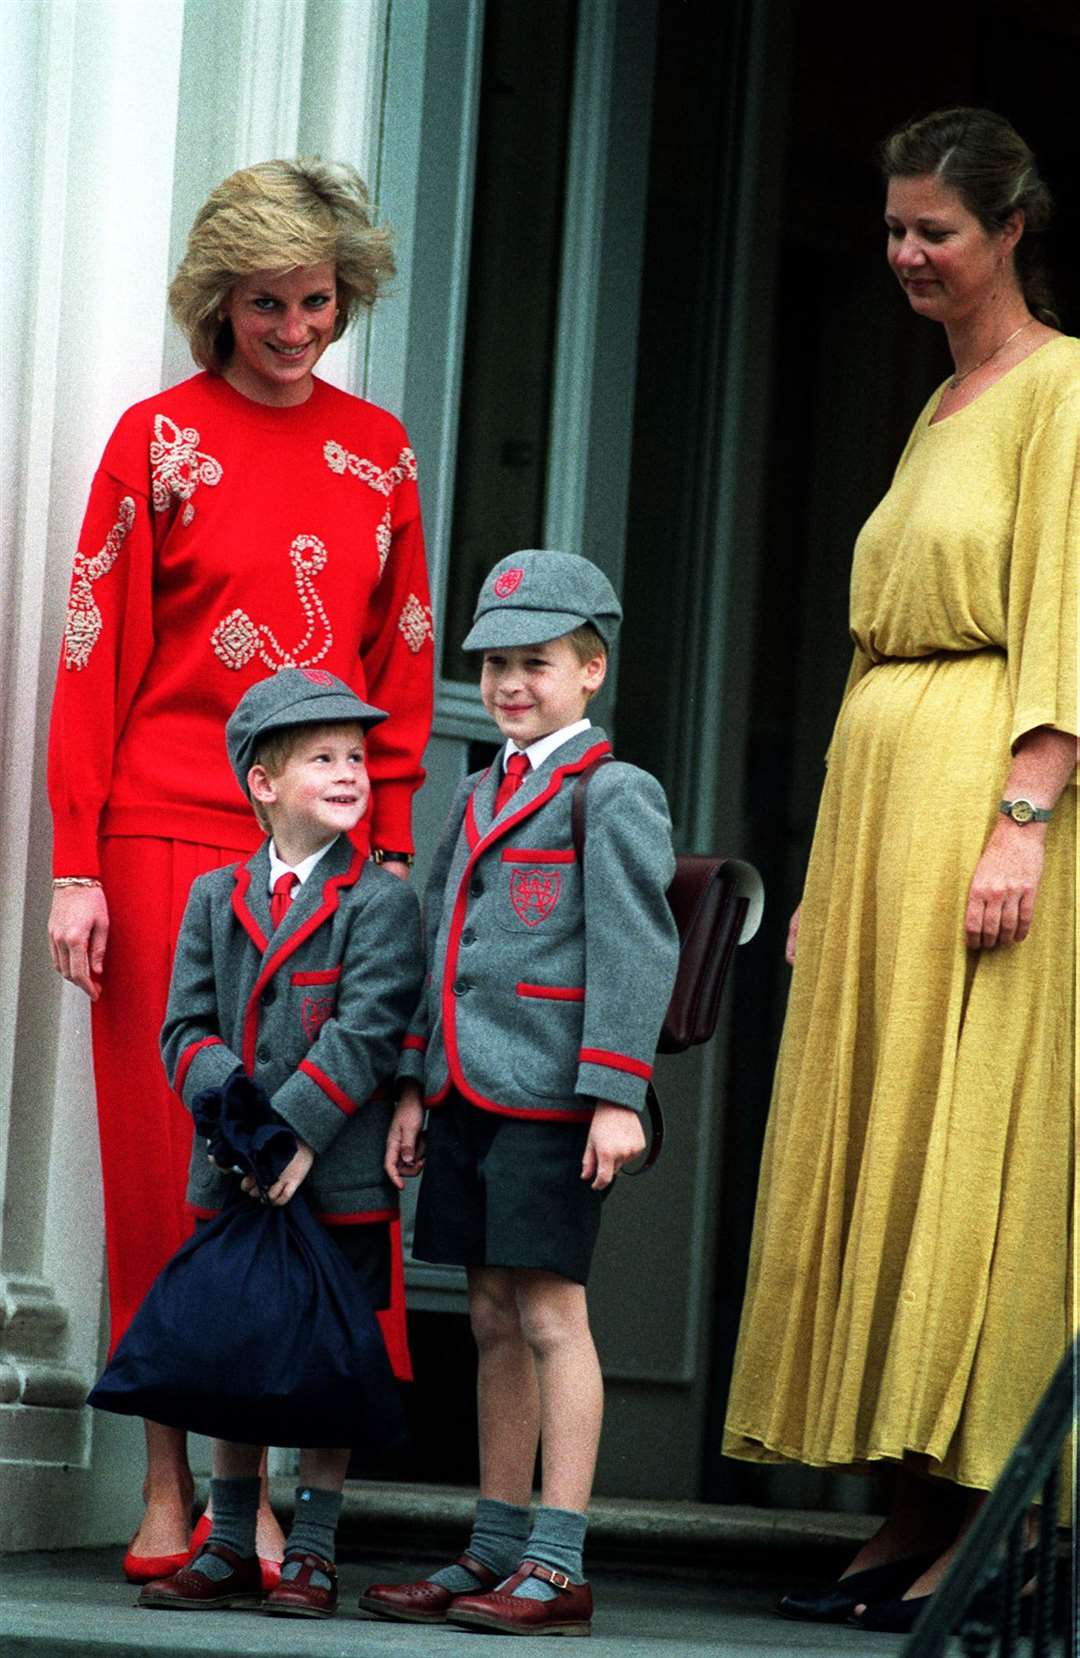 The princess with her son Prince Harry and Prince William (Ron Bell/PA)